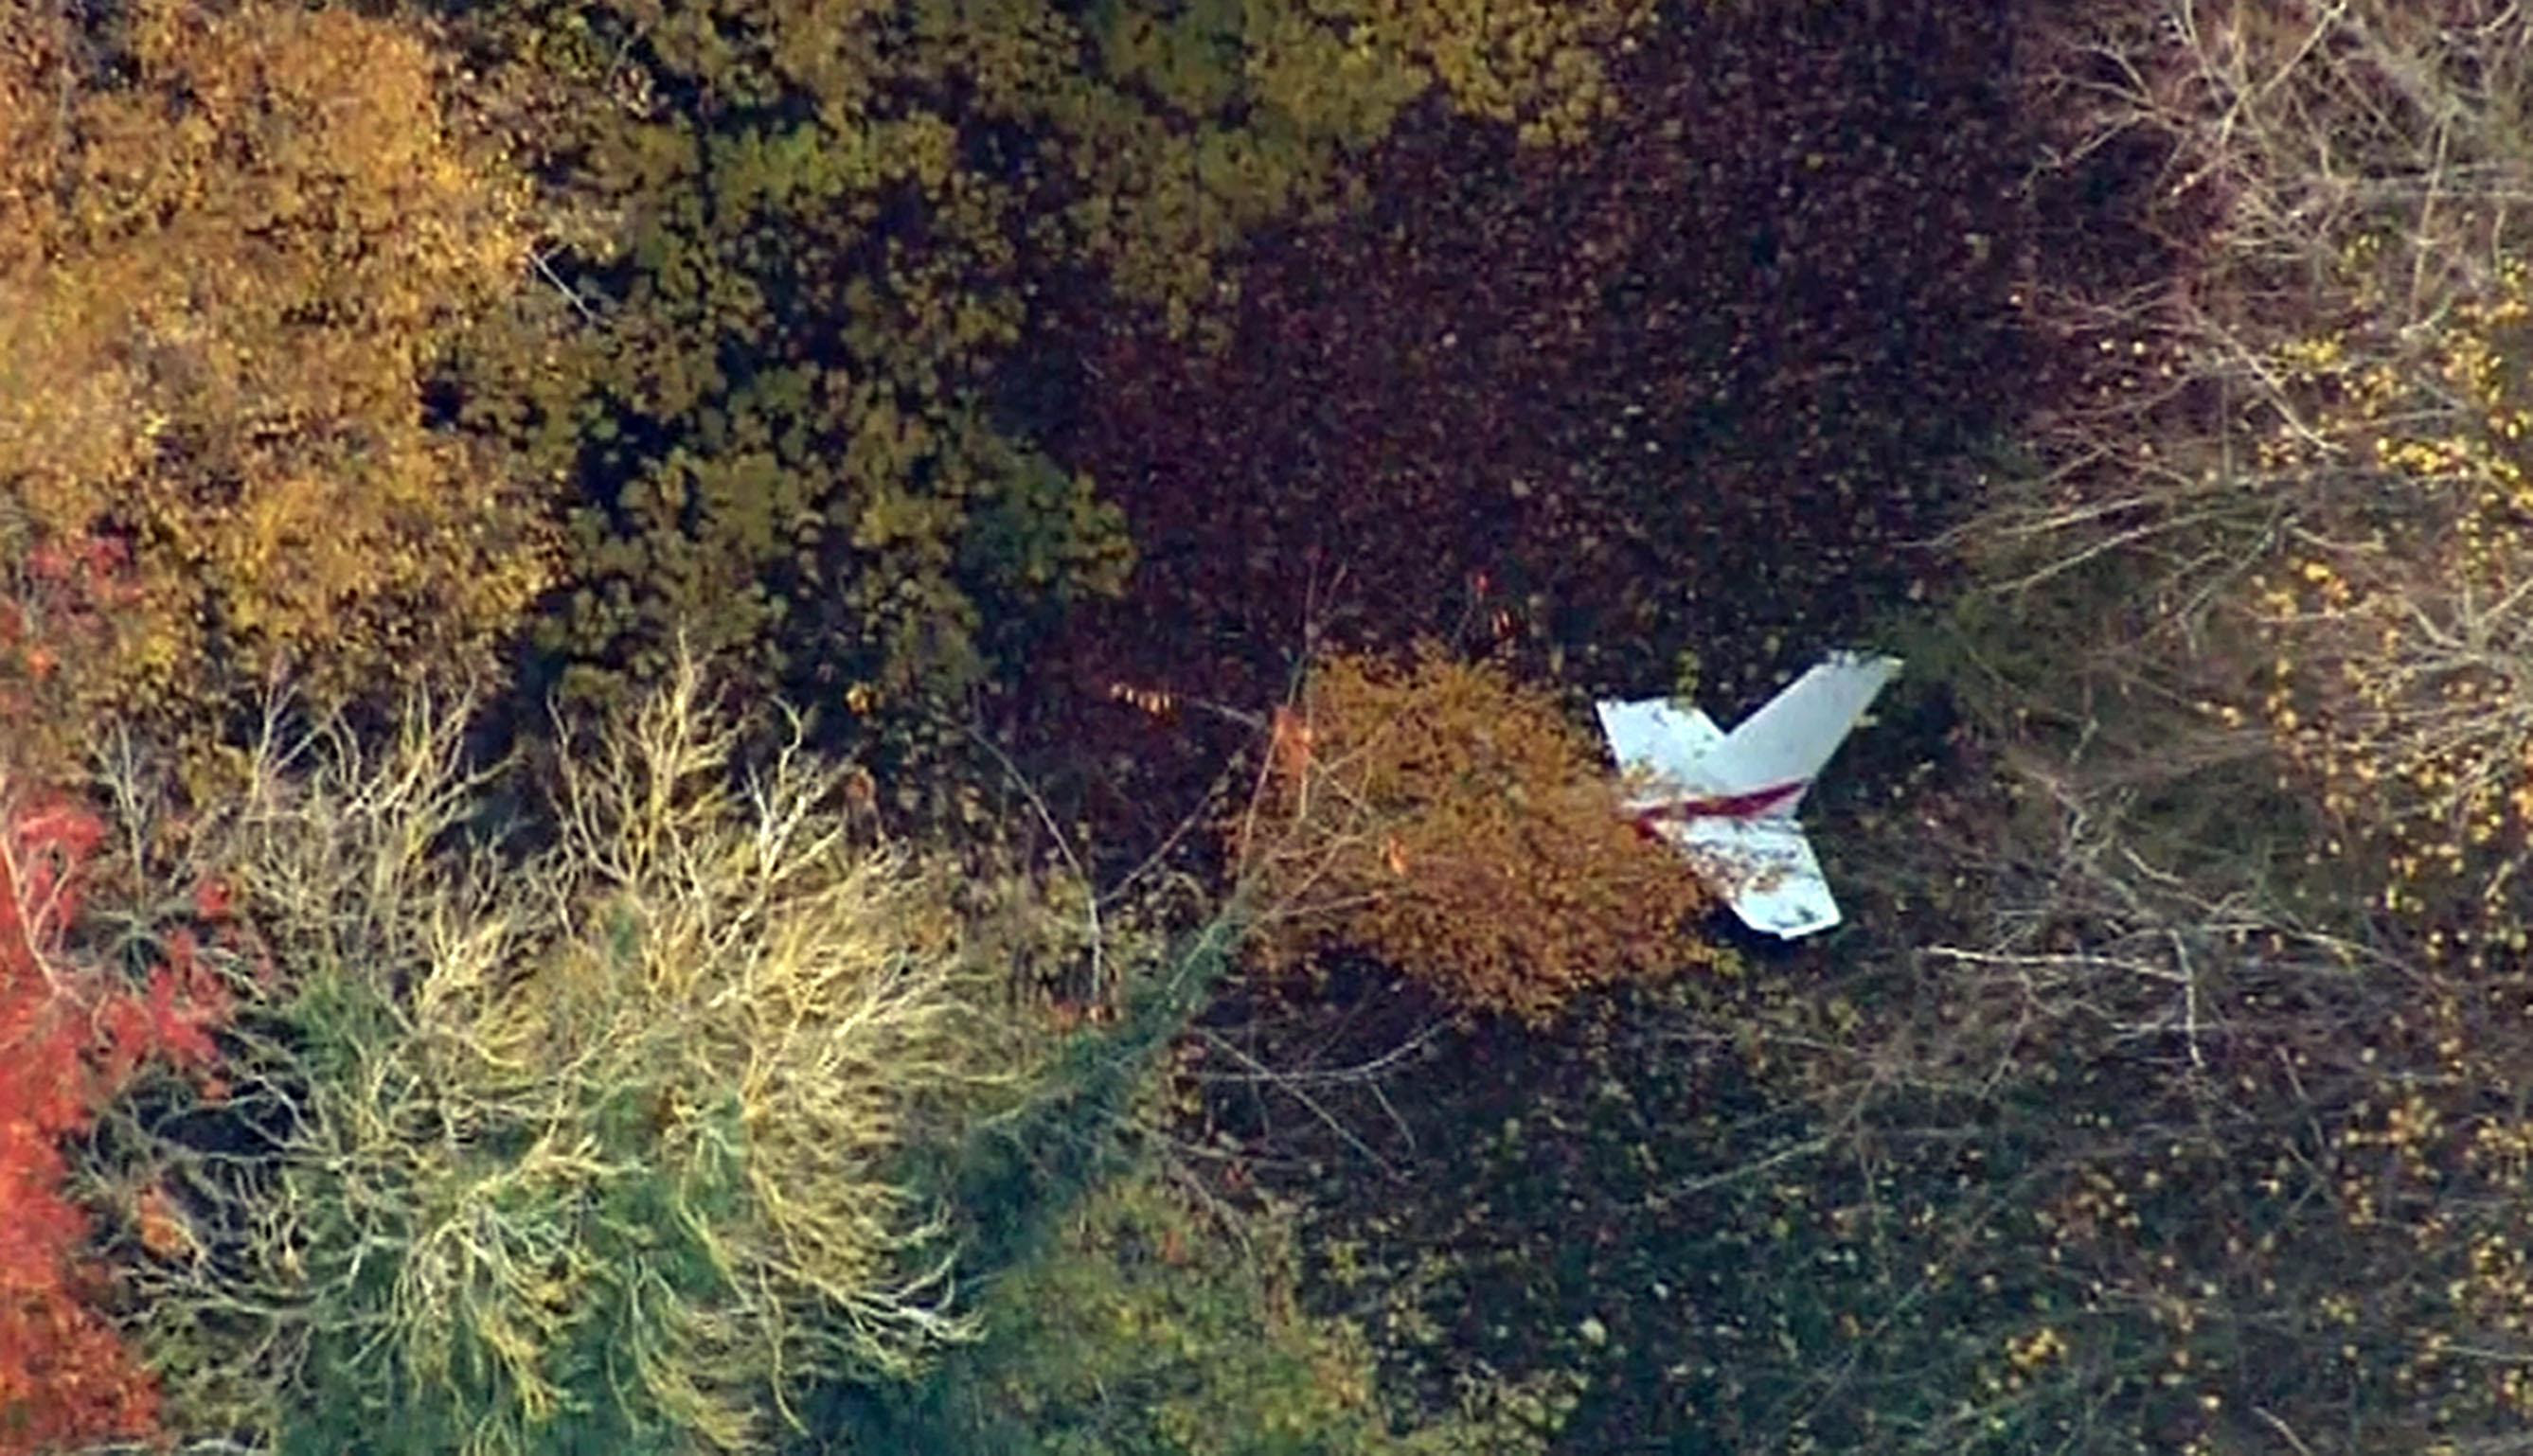 Rothschild Manor Plane Crash! Four Dead as Plane and Helicopter Wreckage Lands (Video)